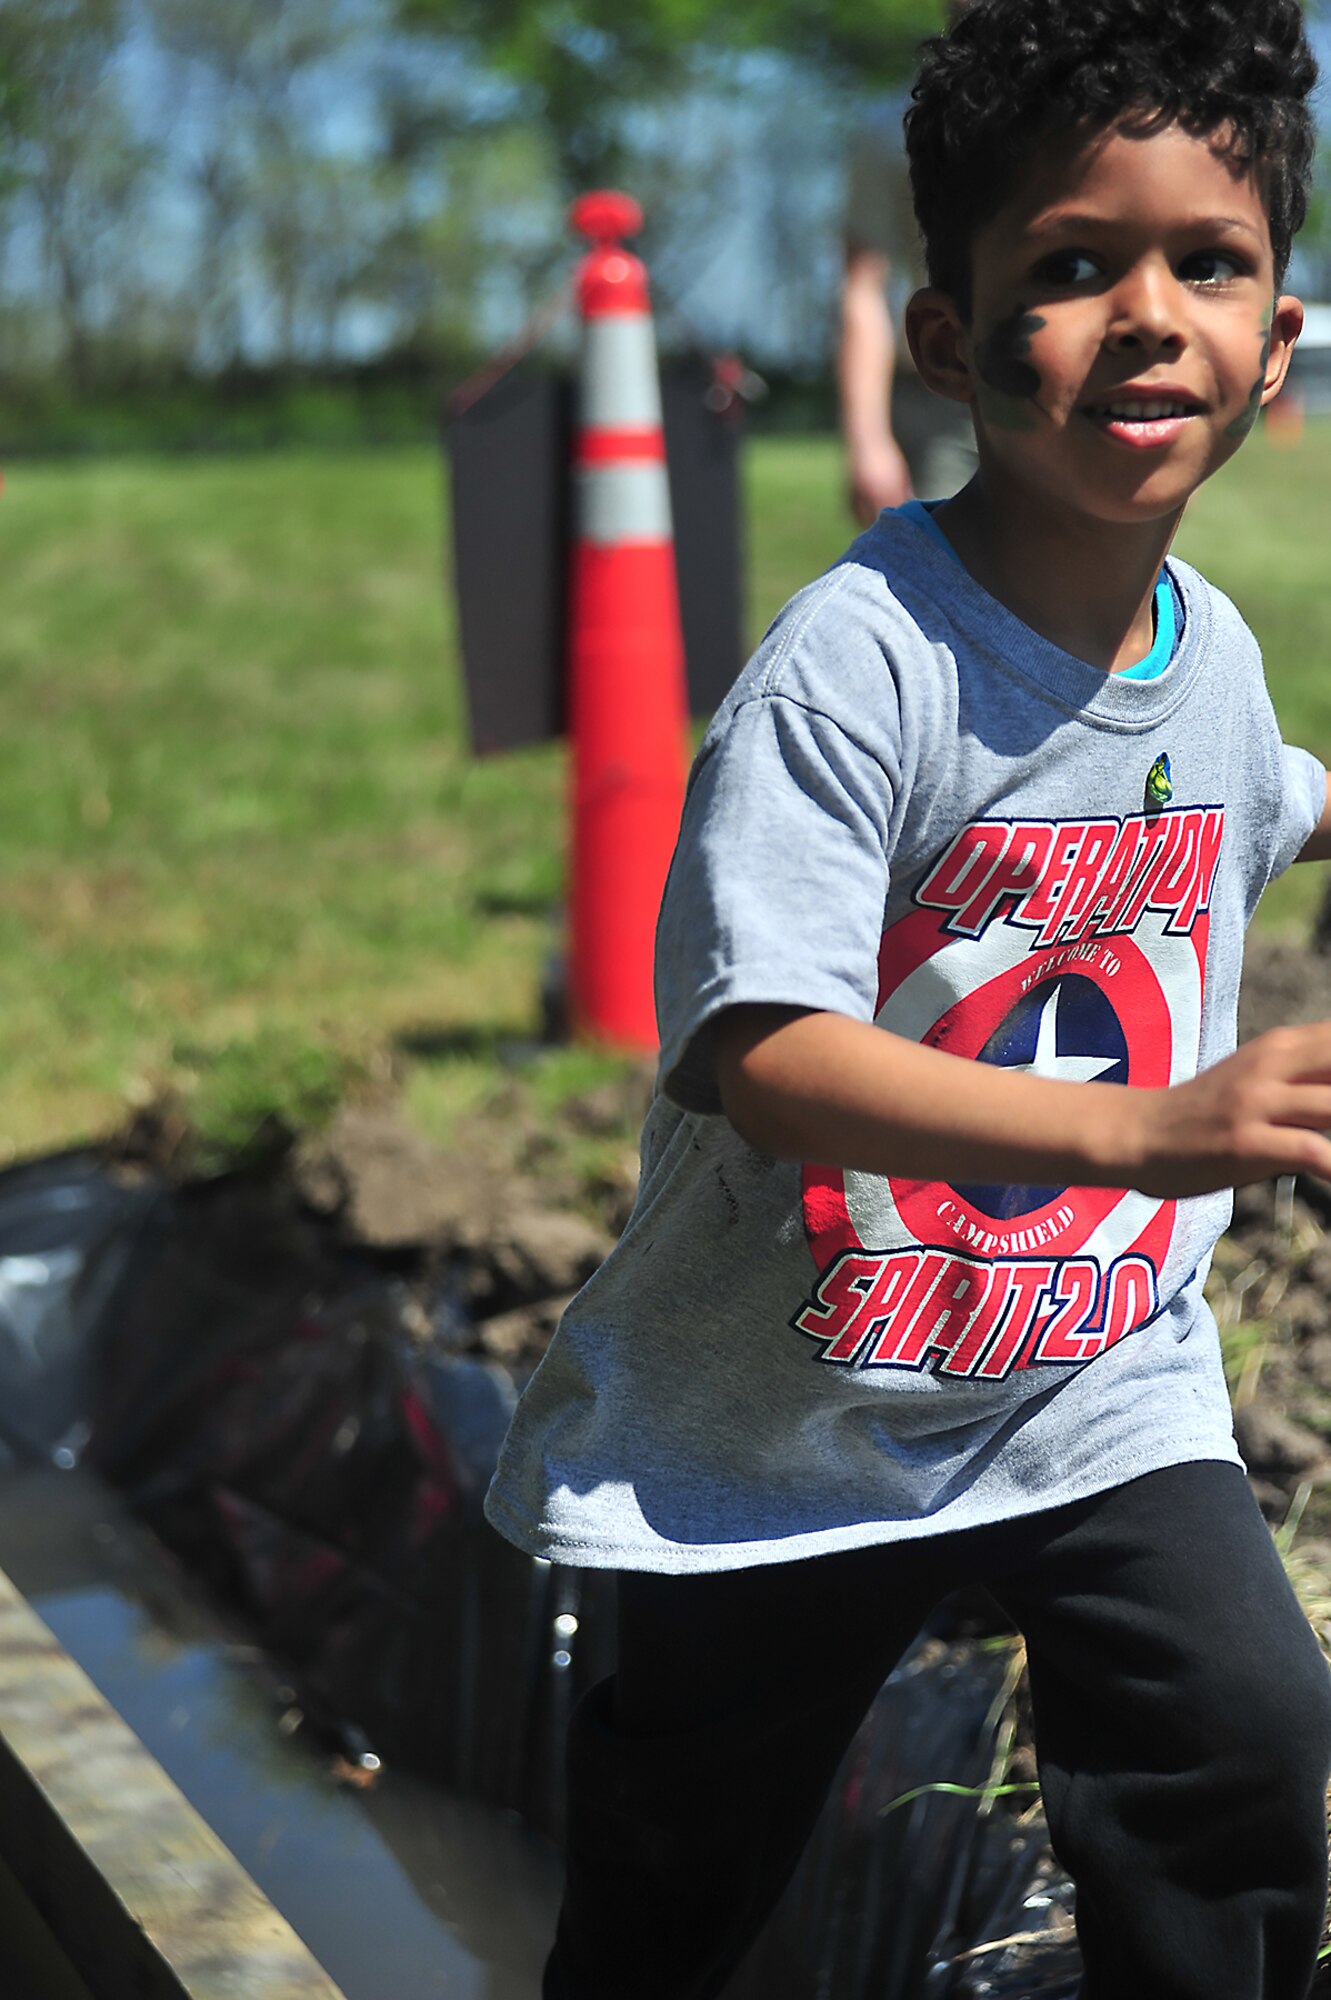 Christian Johnson, son of U.S. Air Force Tech. Sgt. Shauna Robinson, the 509th Comptroller Squadron NCO in charge of financial management, smiles as he finishes part of Operation Spirit’s obstacle course at Whiteman Air Force Base, Mo., April 23, 2016. Participants in Operation Spirit had the chance to experience elements of Air Force deployments. (U.S. Air Force photo by Senior Airman Jovan Banks)